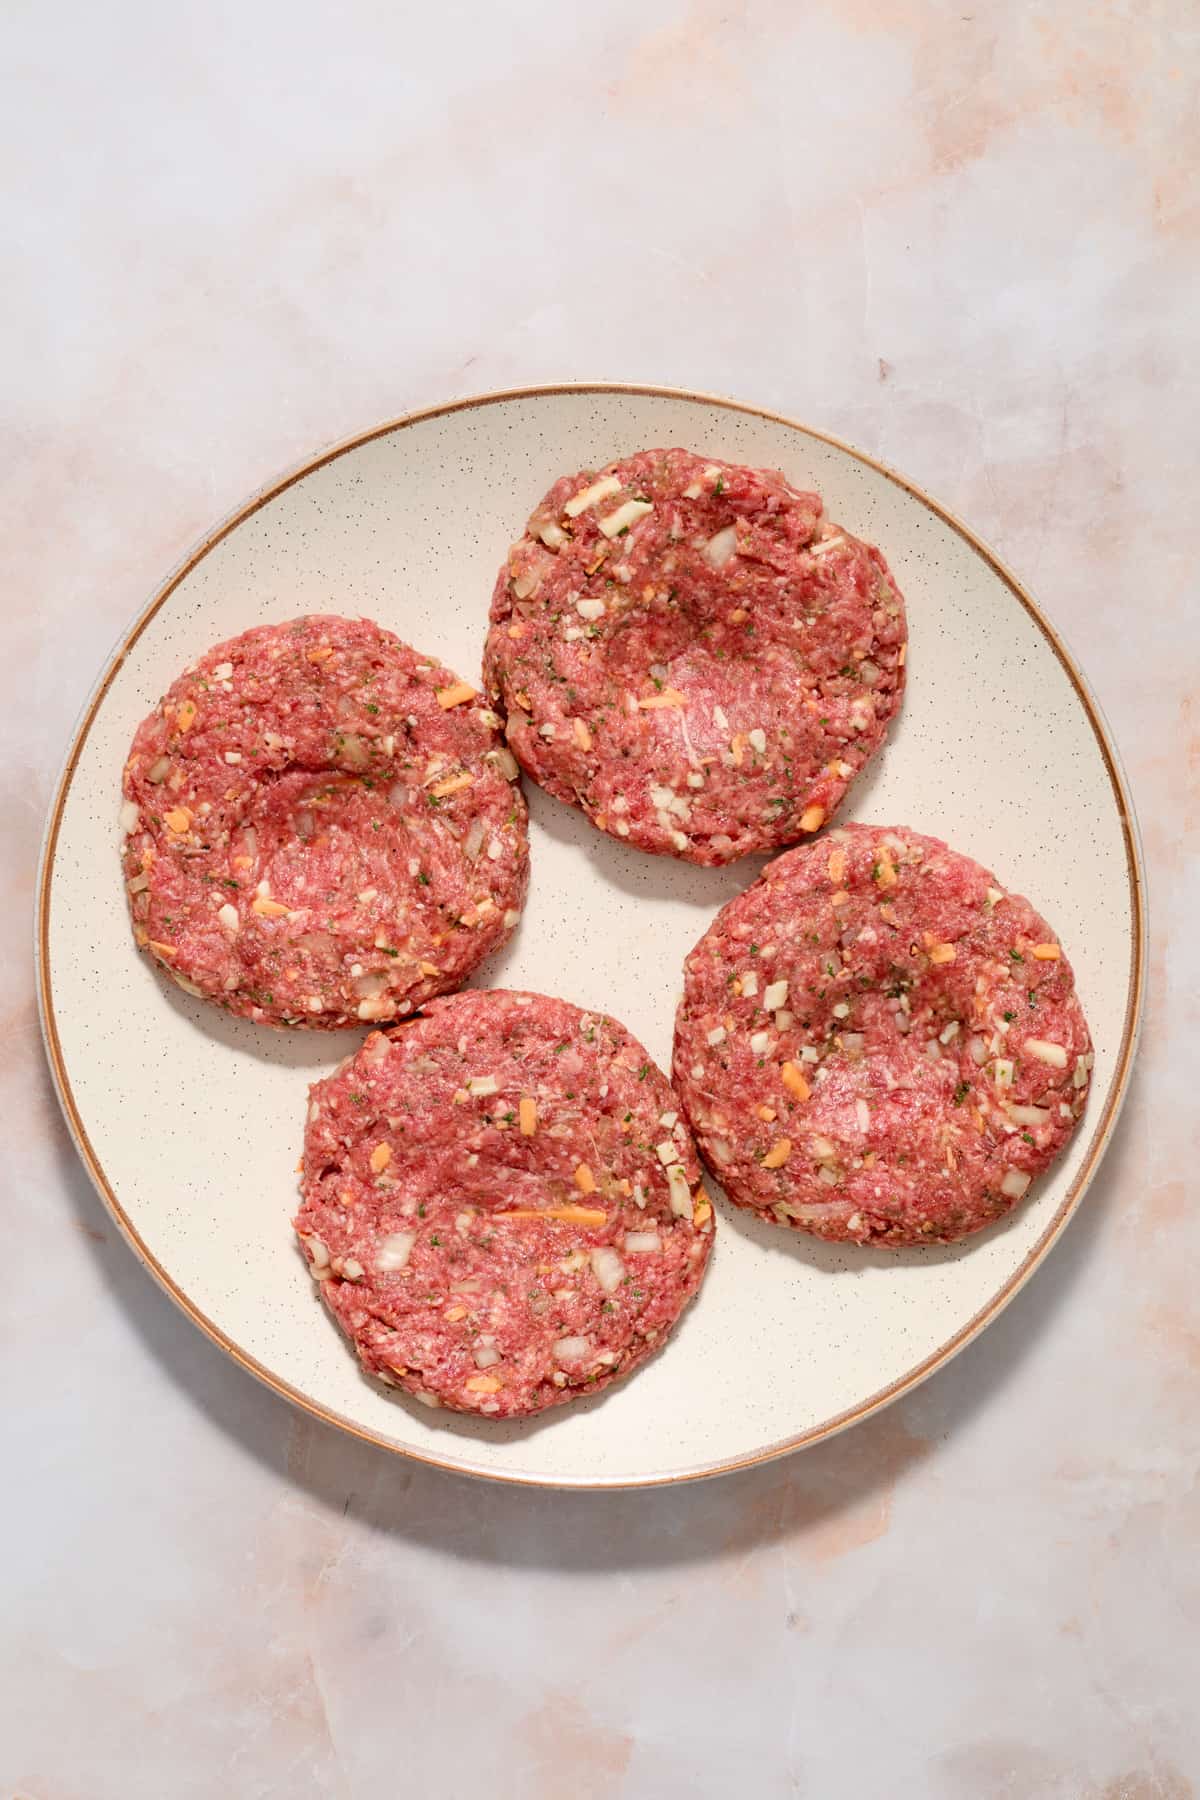 Hamburger patties on plate prepped with dimple in center.